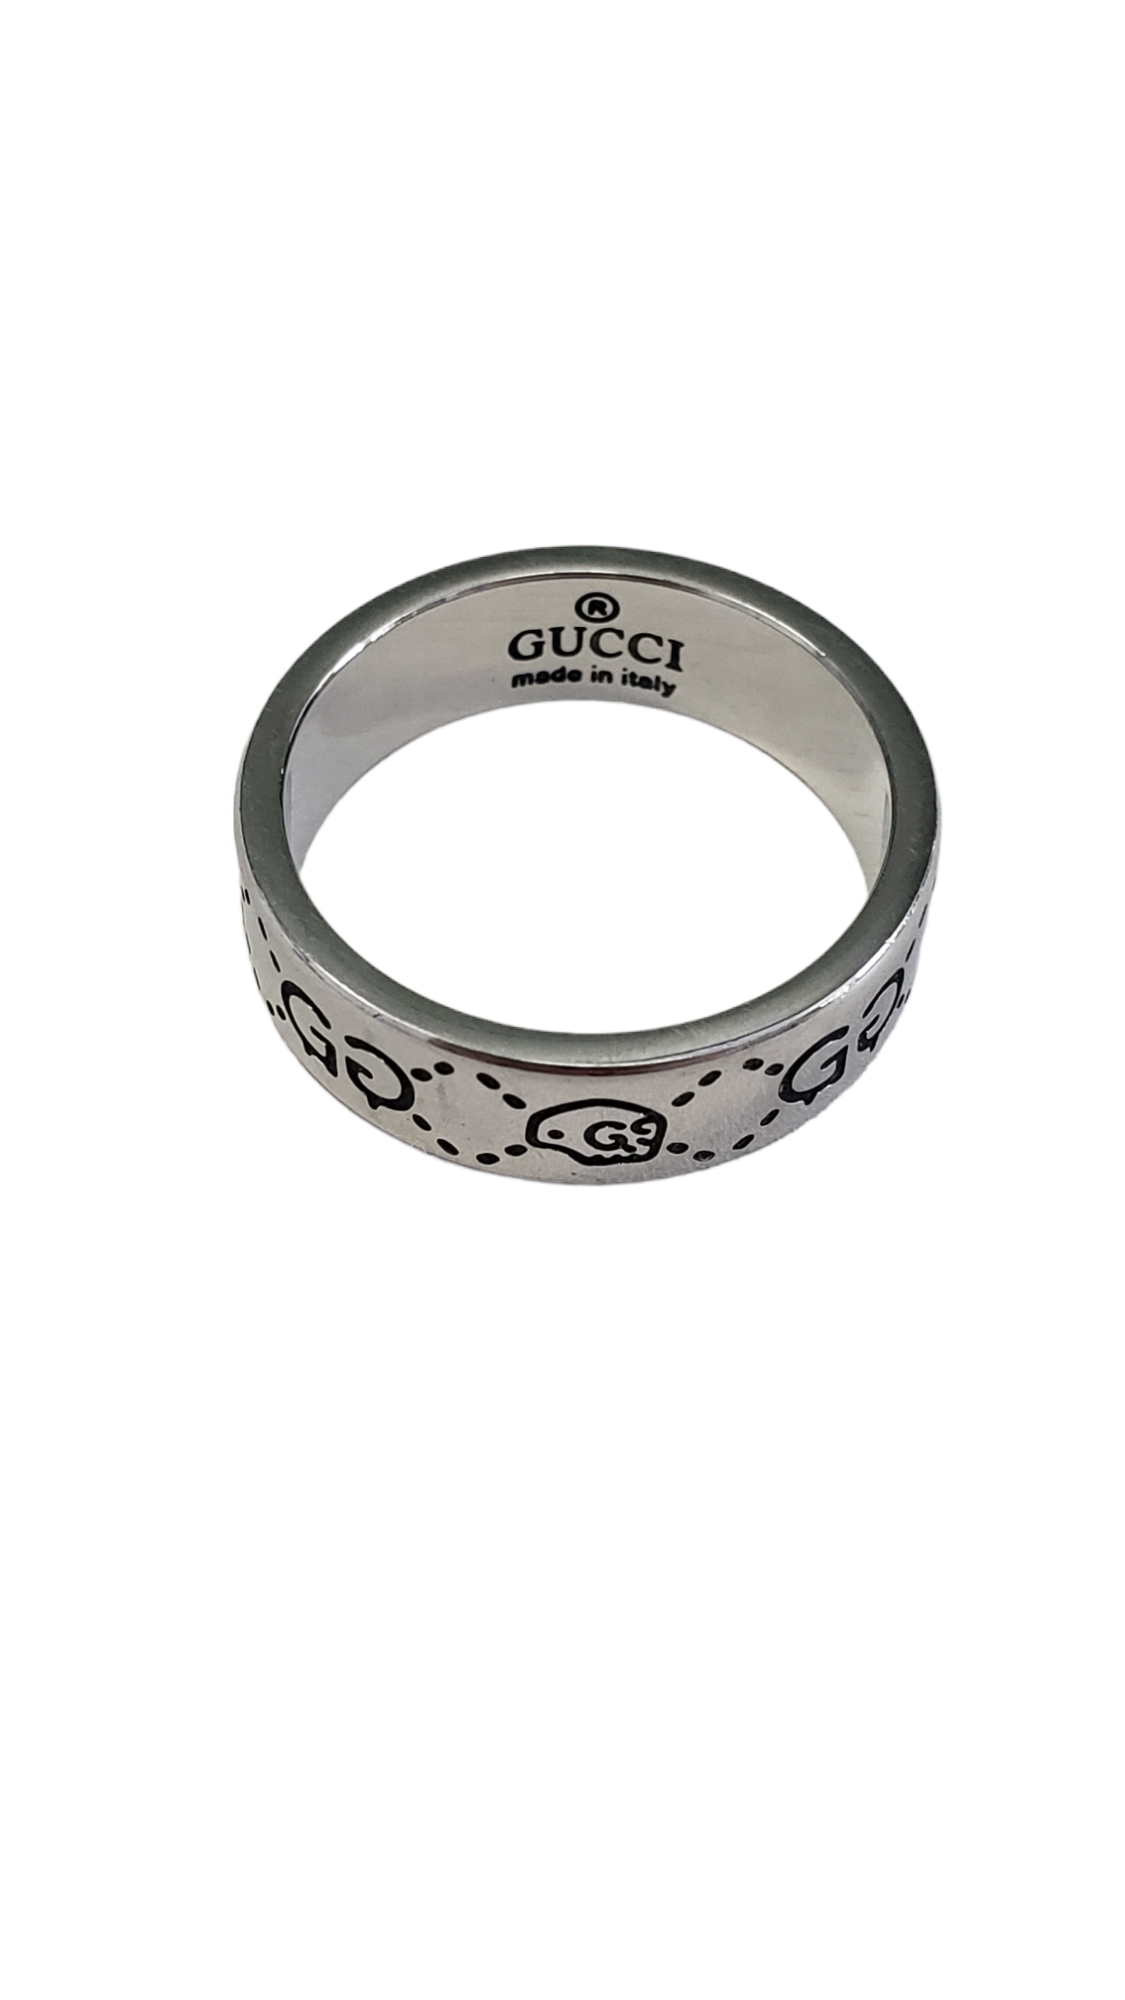 Gucci ghost skull ring 925 sterling silver 6mm Size 8 (US) Preowned